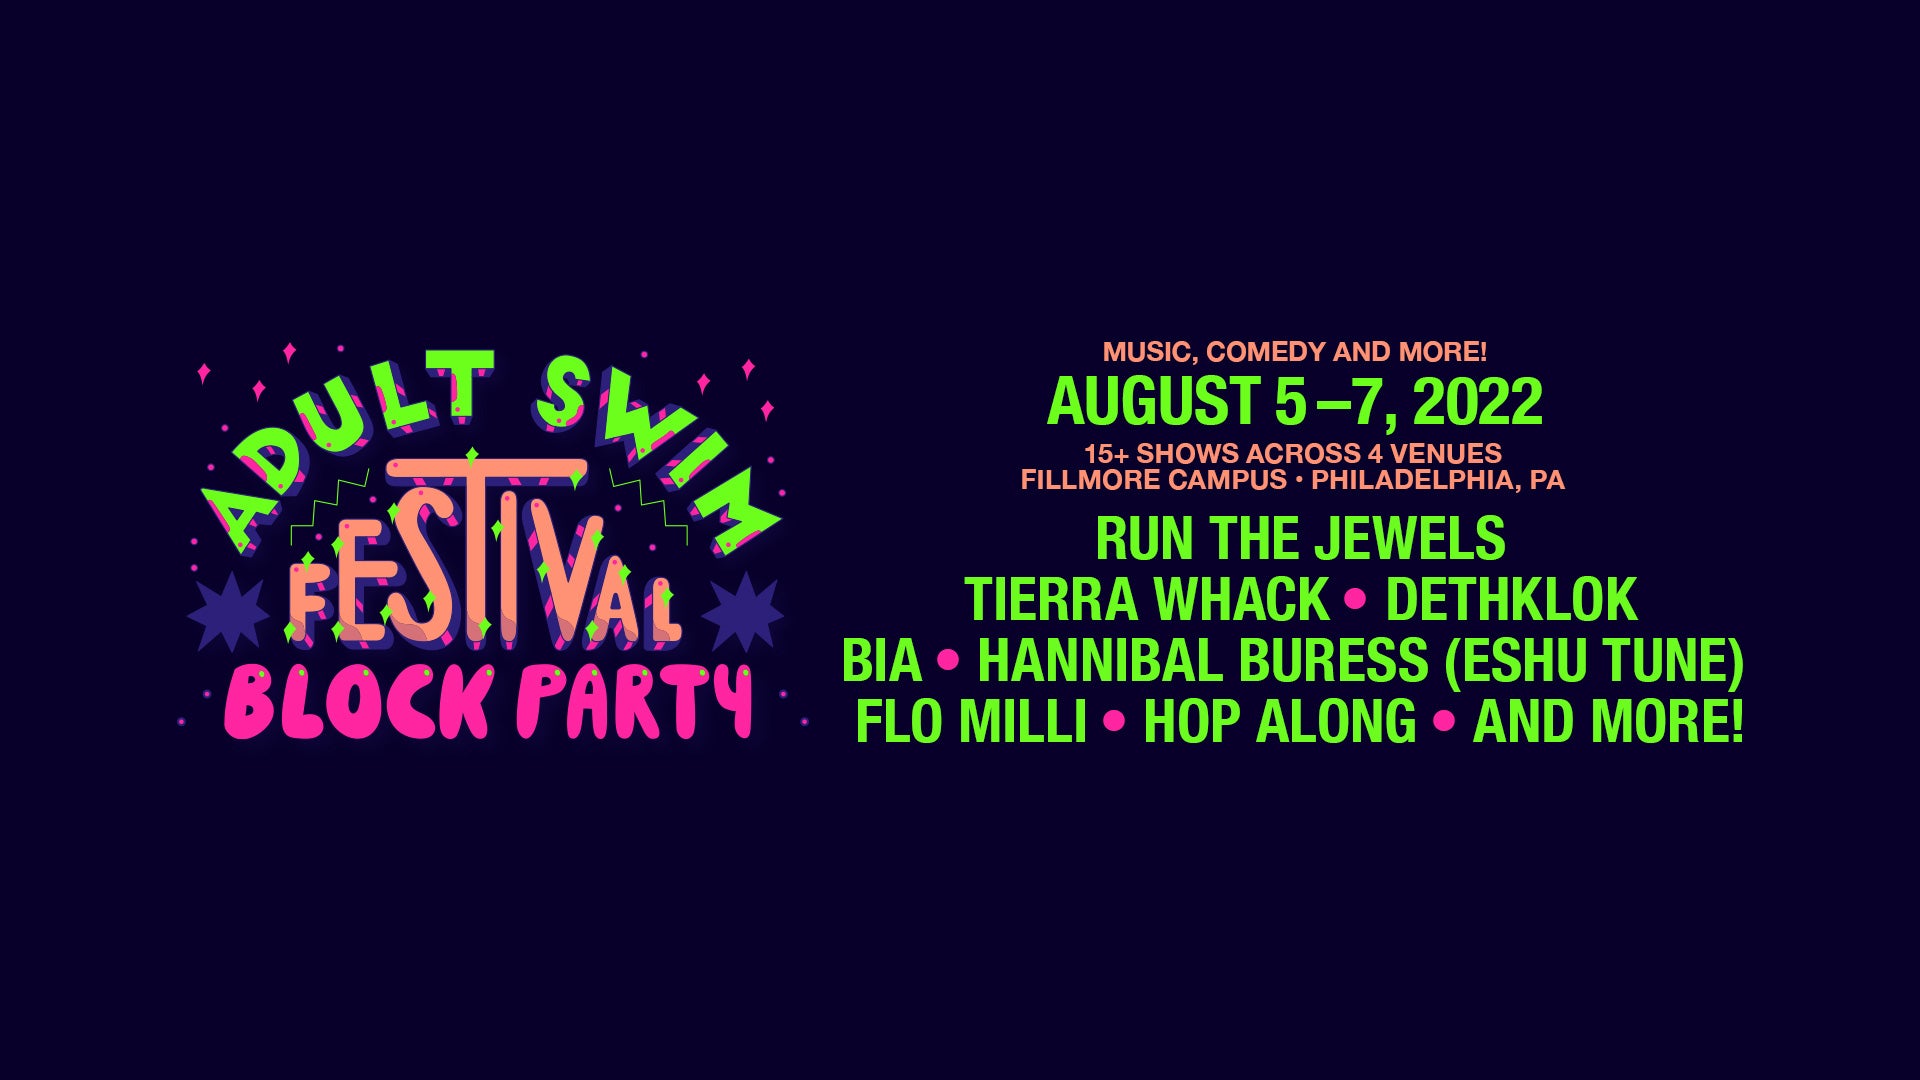 More Info for Things to Know About the Adult Swim Festival Block Party